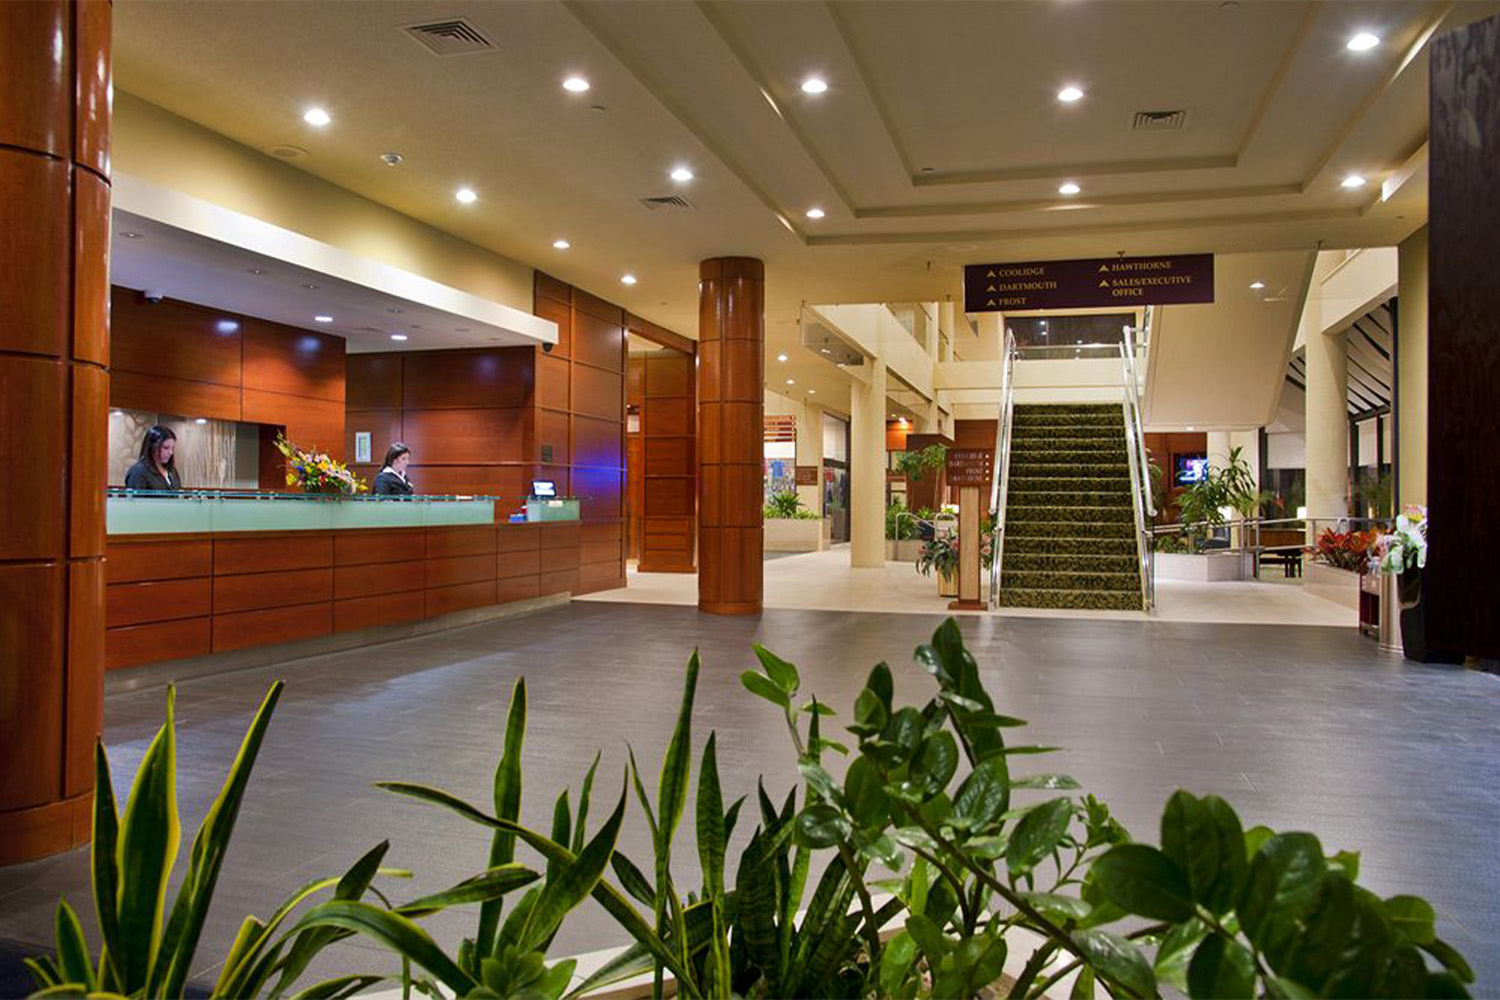 lobby area with reception desk to the left, and a stairwell to the right 